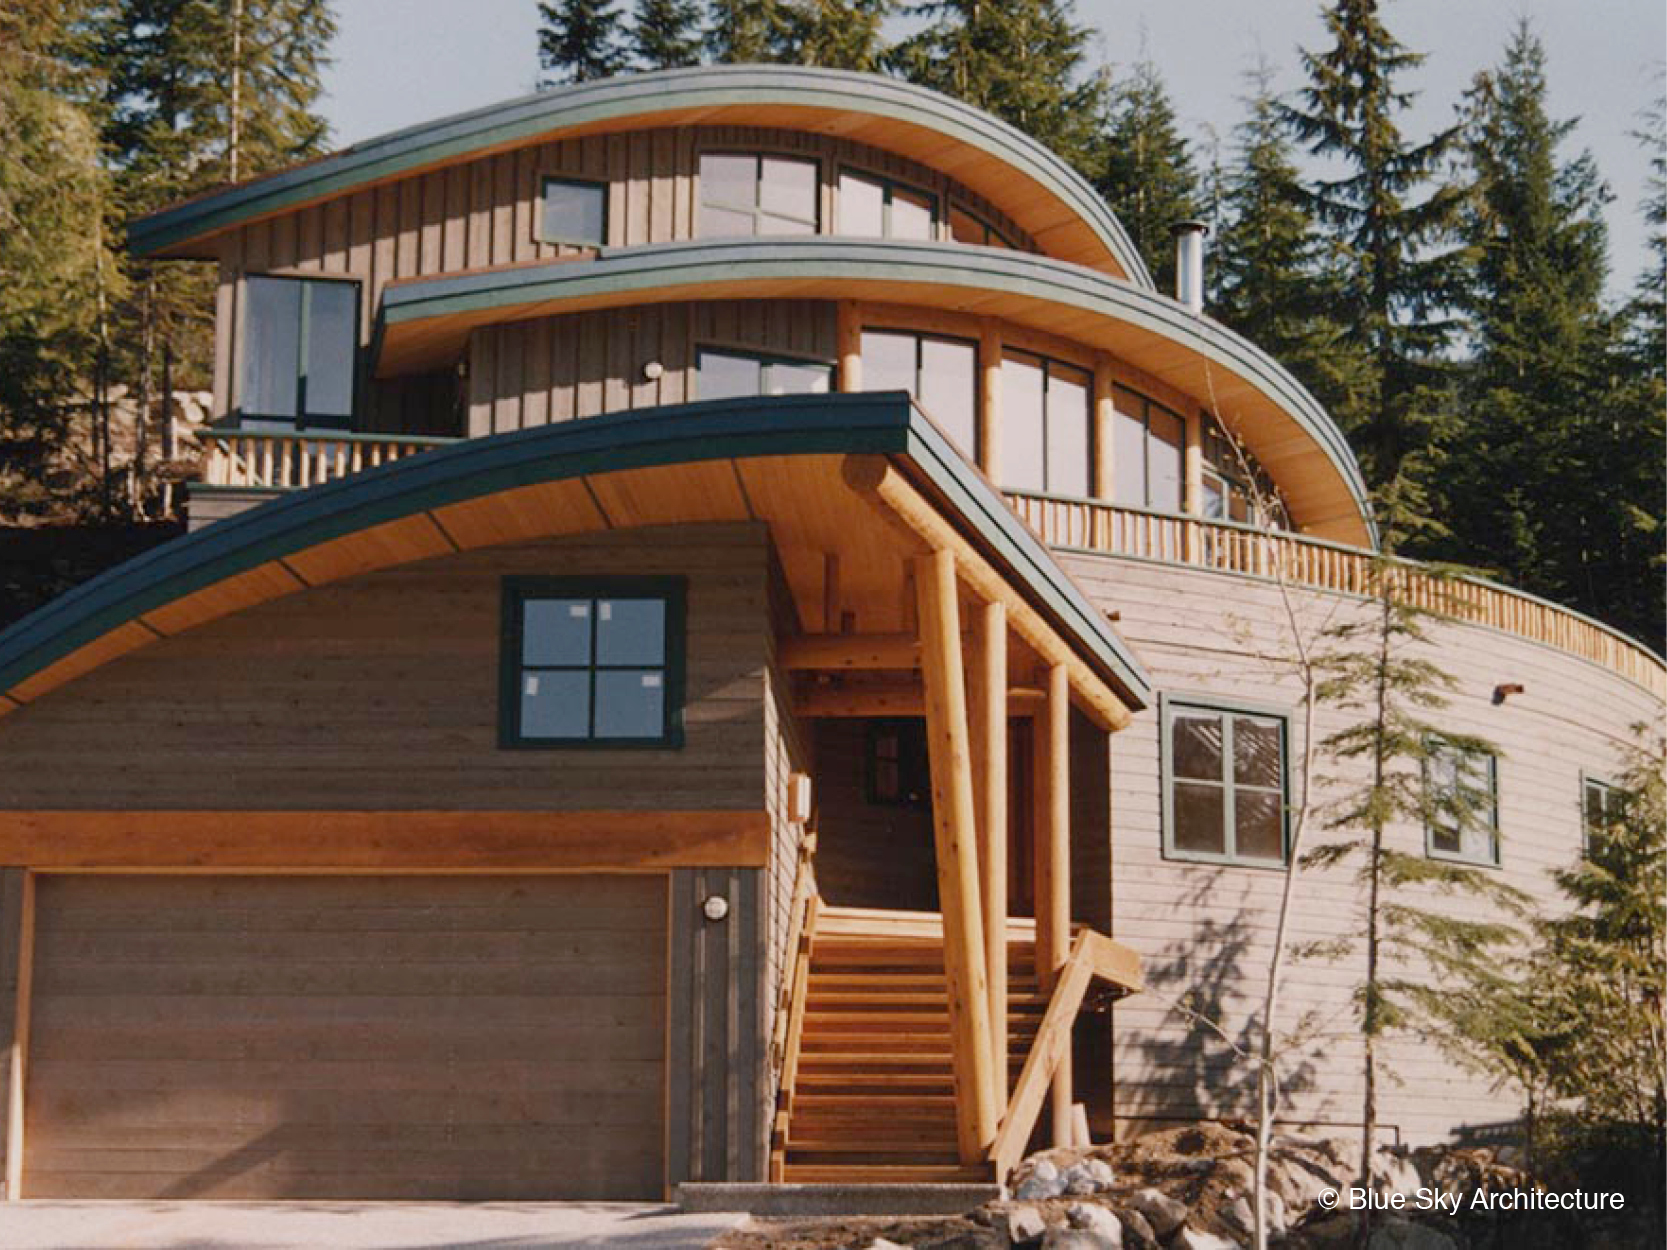 Residence with Radial Design and Natural Materials